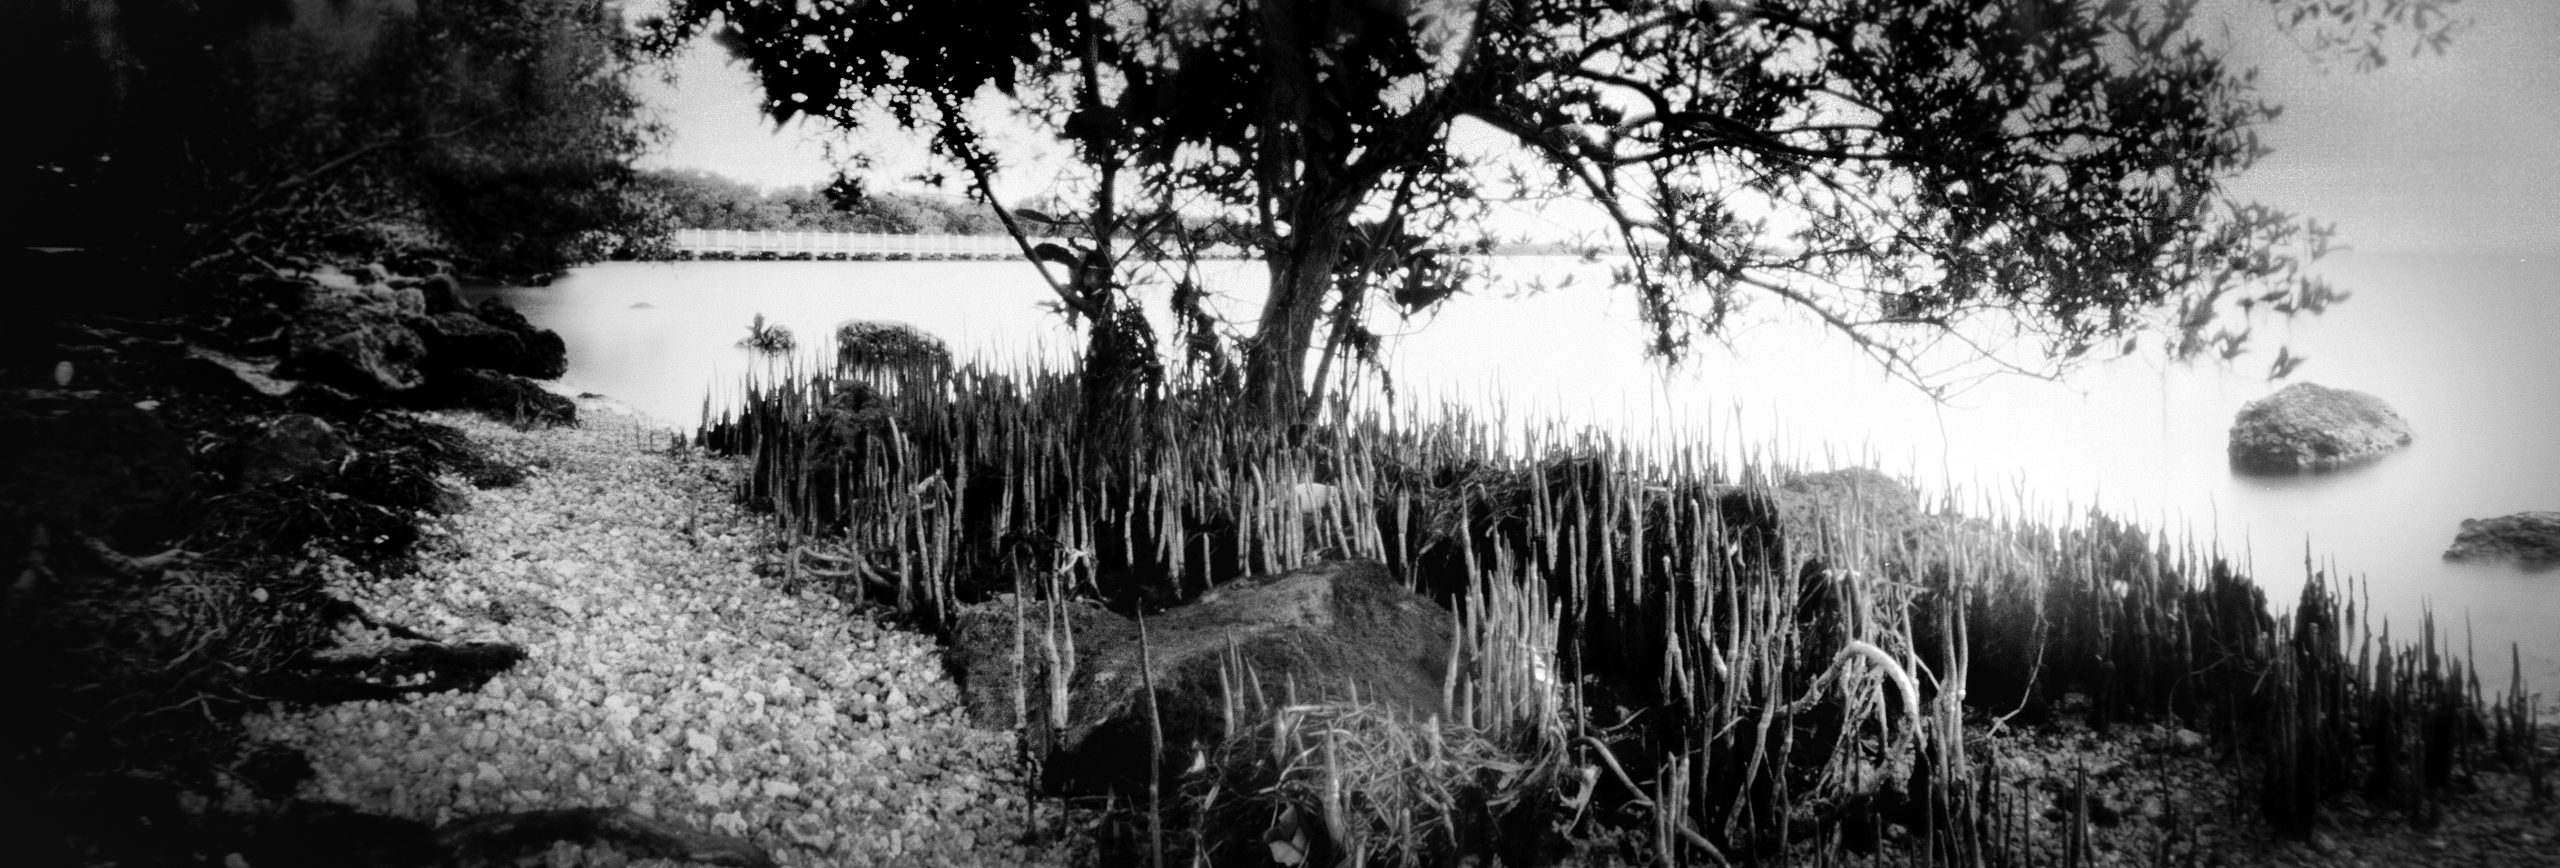 This image was captured on film with a 6 x 17 extreme wide angle pinhole camera. A pinhole camera has no lens, no viewfinder, and no electronics.   Red Mangrove and Buttonwood trees in Biscayne National Park in Florida. Biscayne National Park is for the most part under water and therefore the largest underwater park in the US. The park stretches' from South Miami to Key Largo